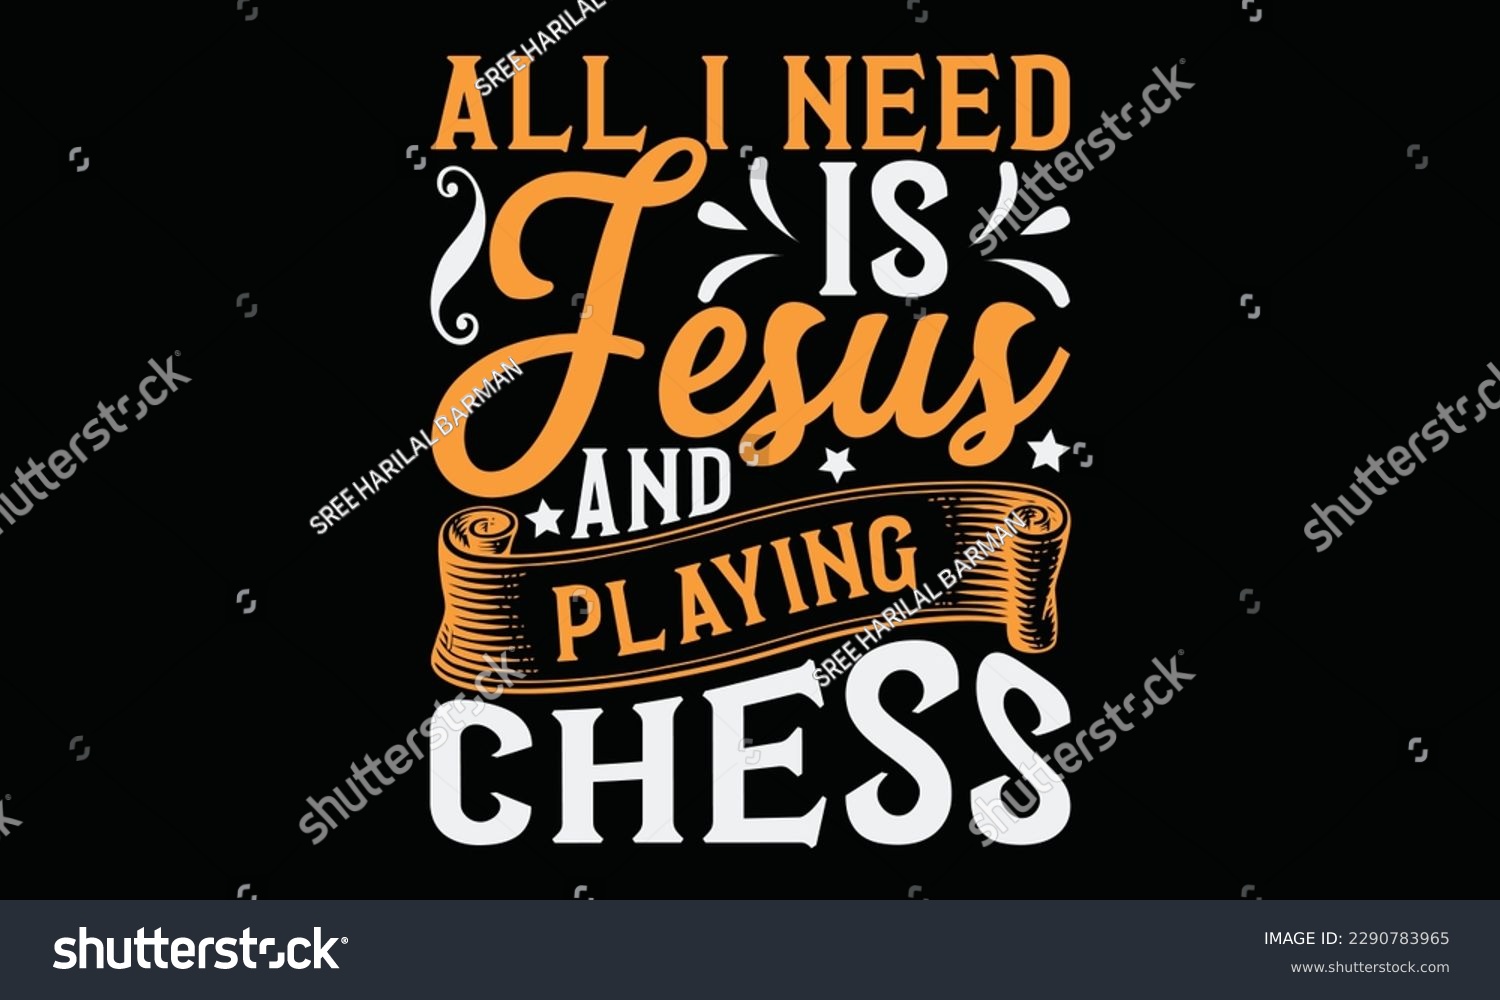 SVG of All I need is Jesus and playing chess - Chess svg typography T-shirt Design, Handmade calligraphy vector illustration, template, greeting cards, mugs, brochures, posters, labels, and stickers. EPA 10. svg